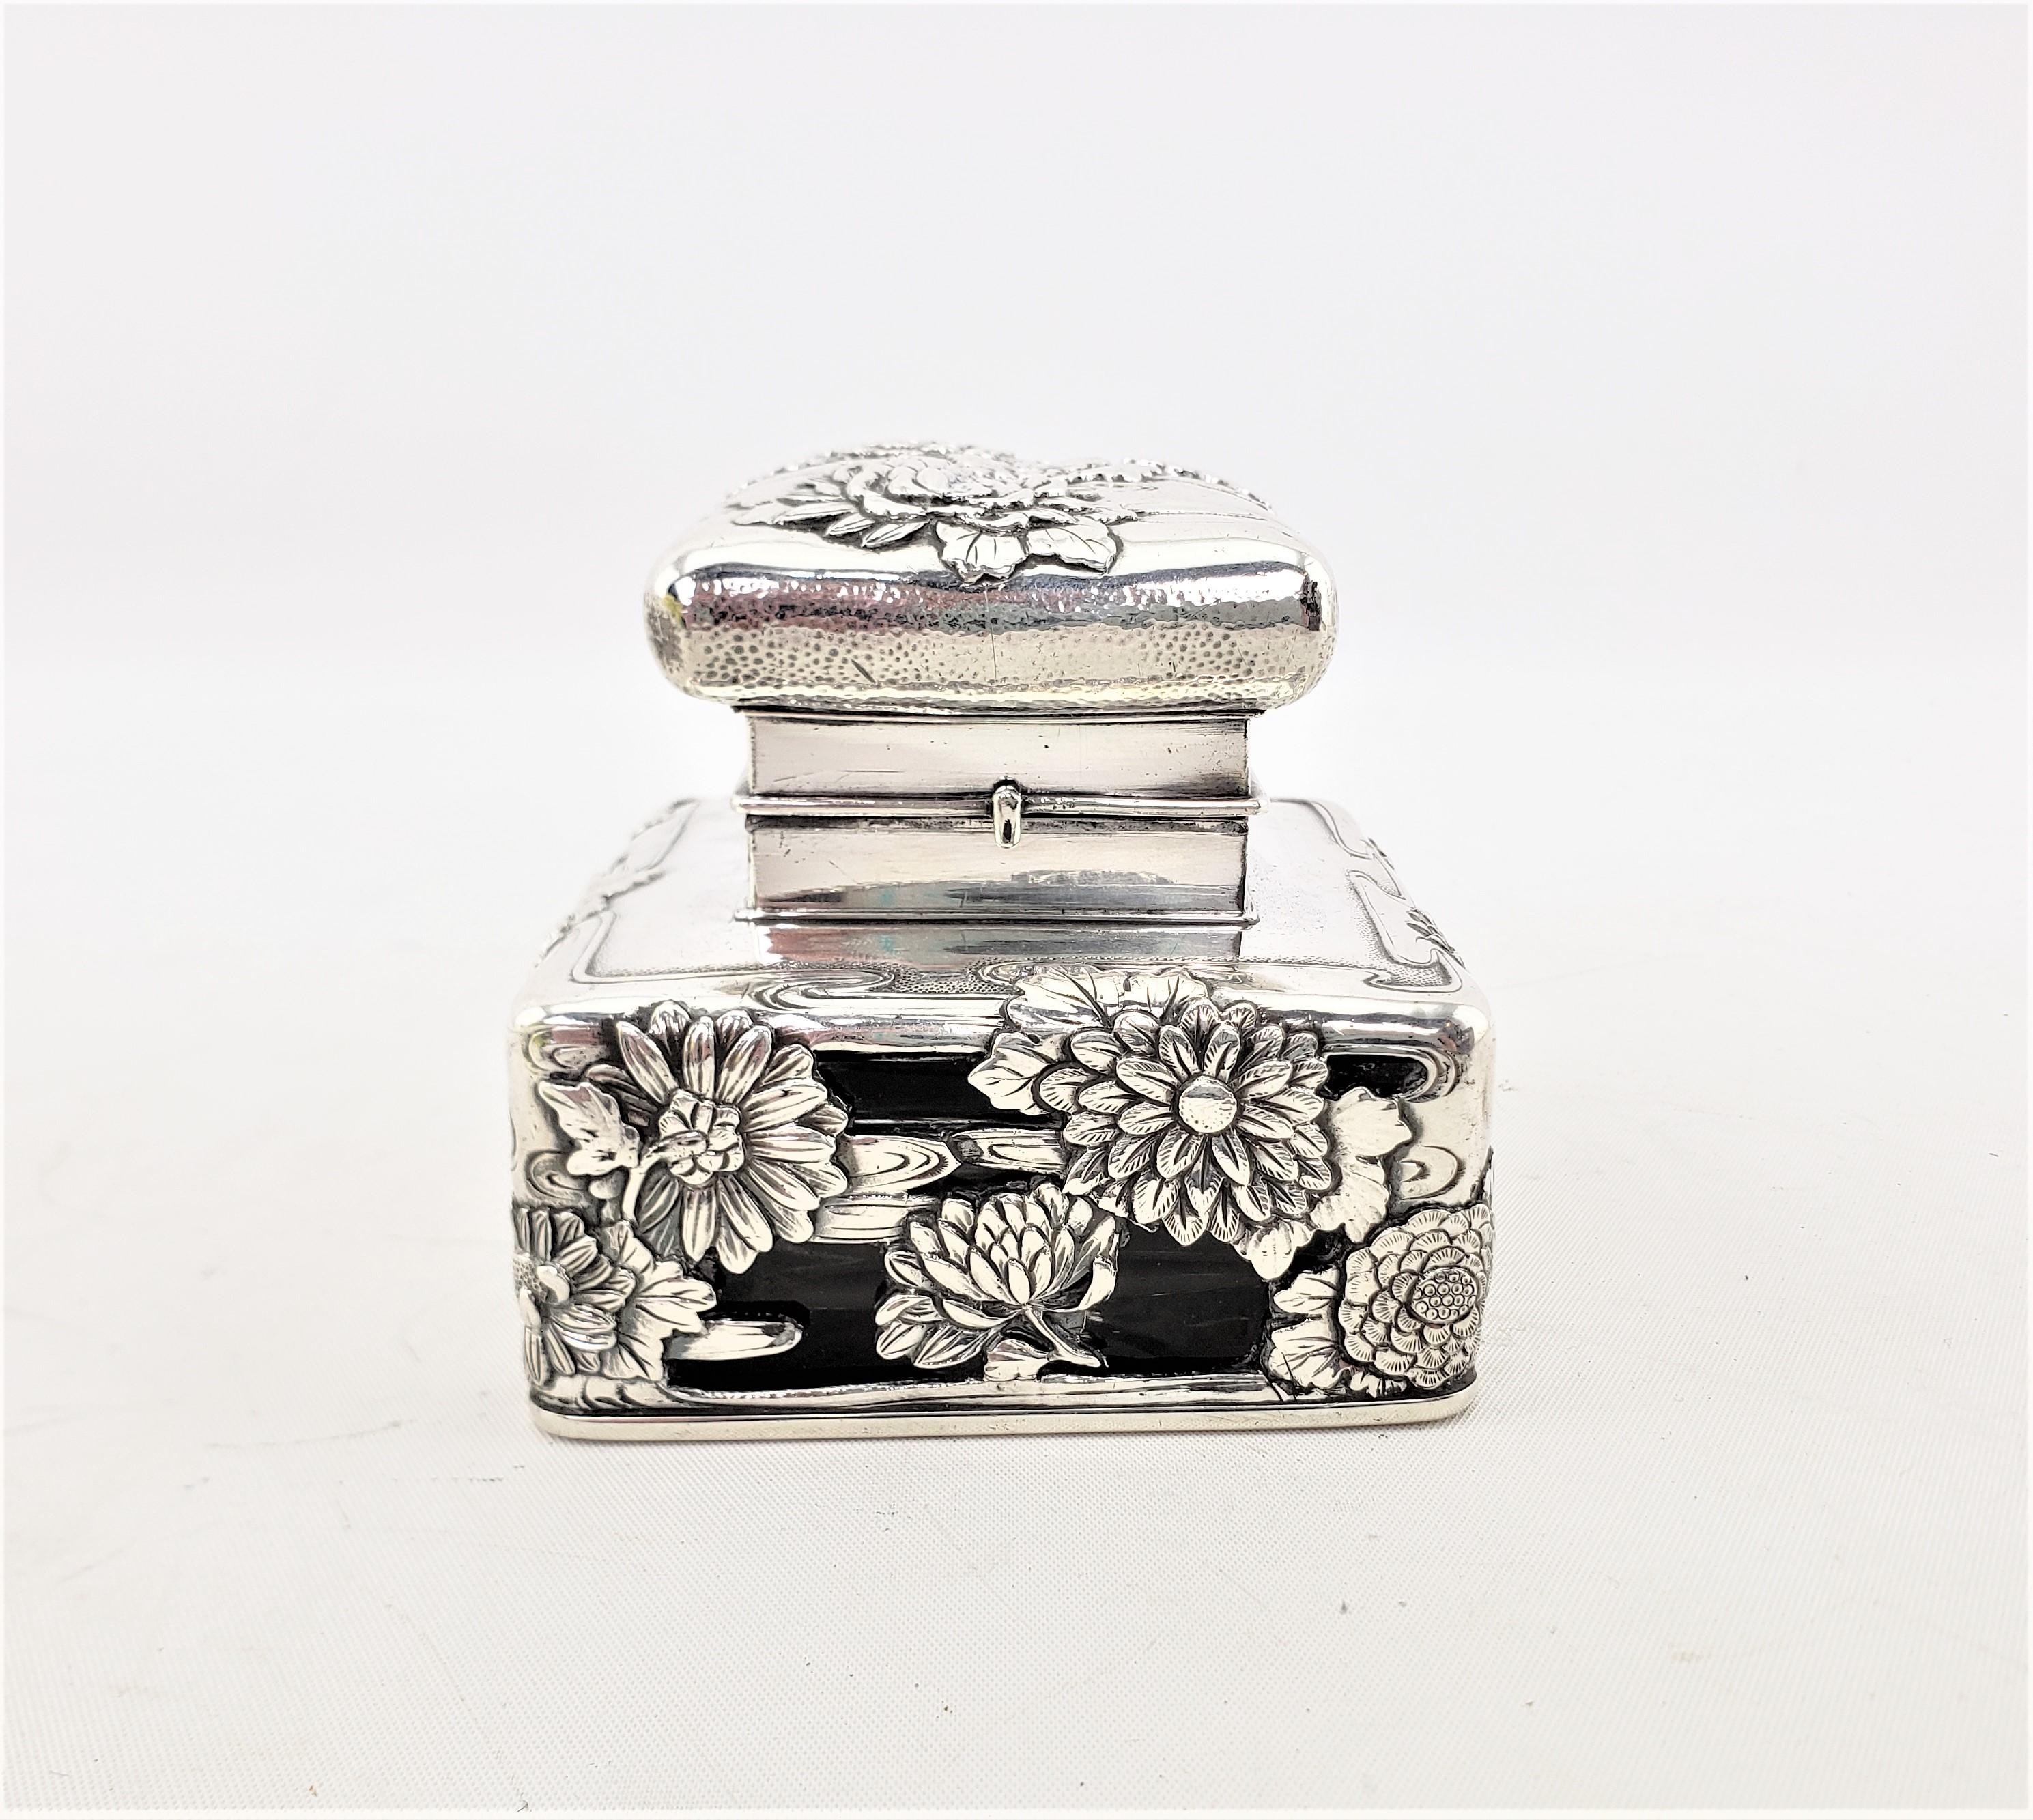 Anglo-Japanese Arthur & Bond Sterling Silver Inkwell with Repousse & Chased Water Lilies For Sale